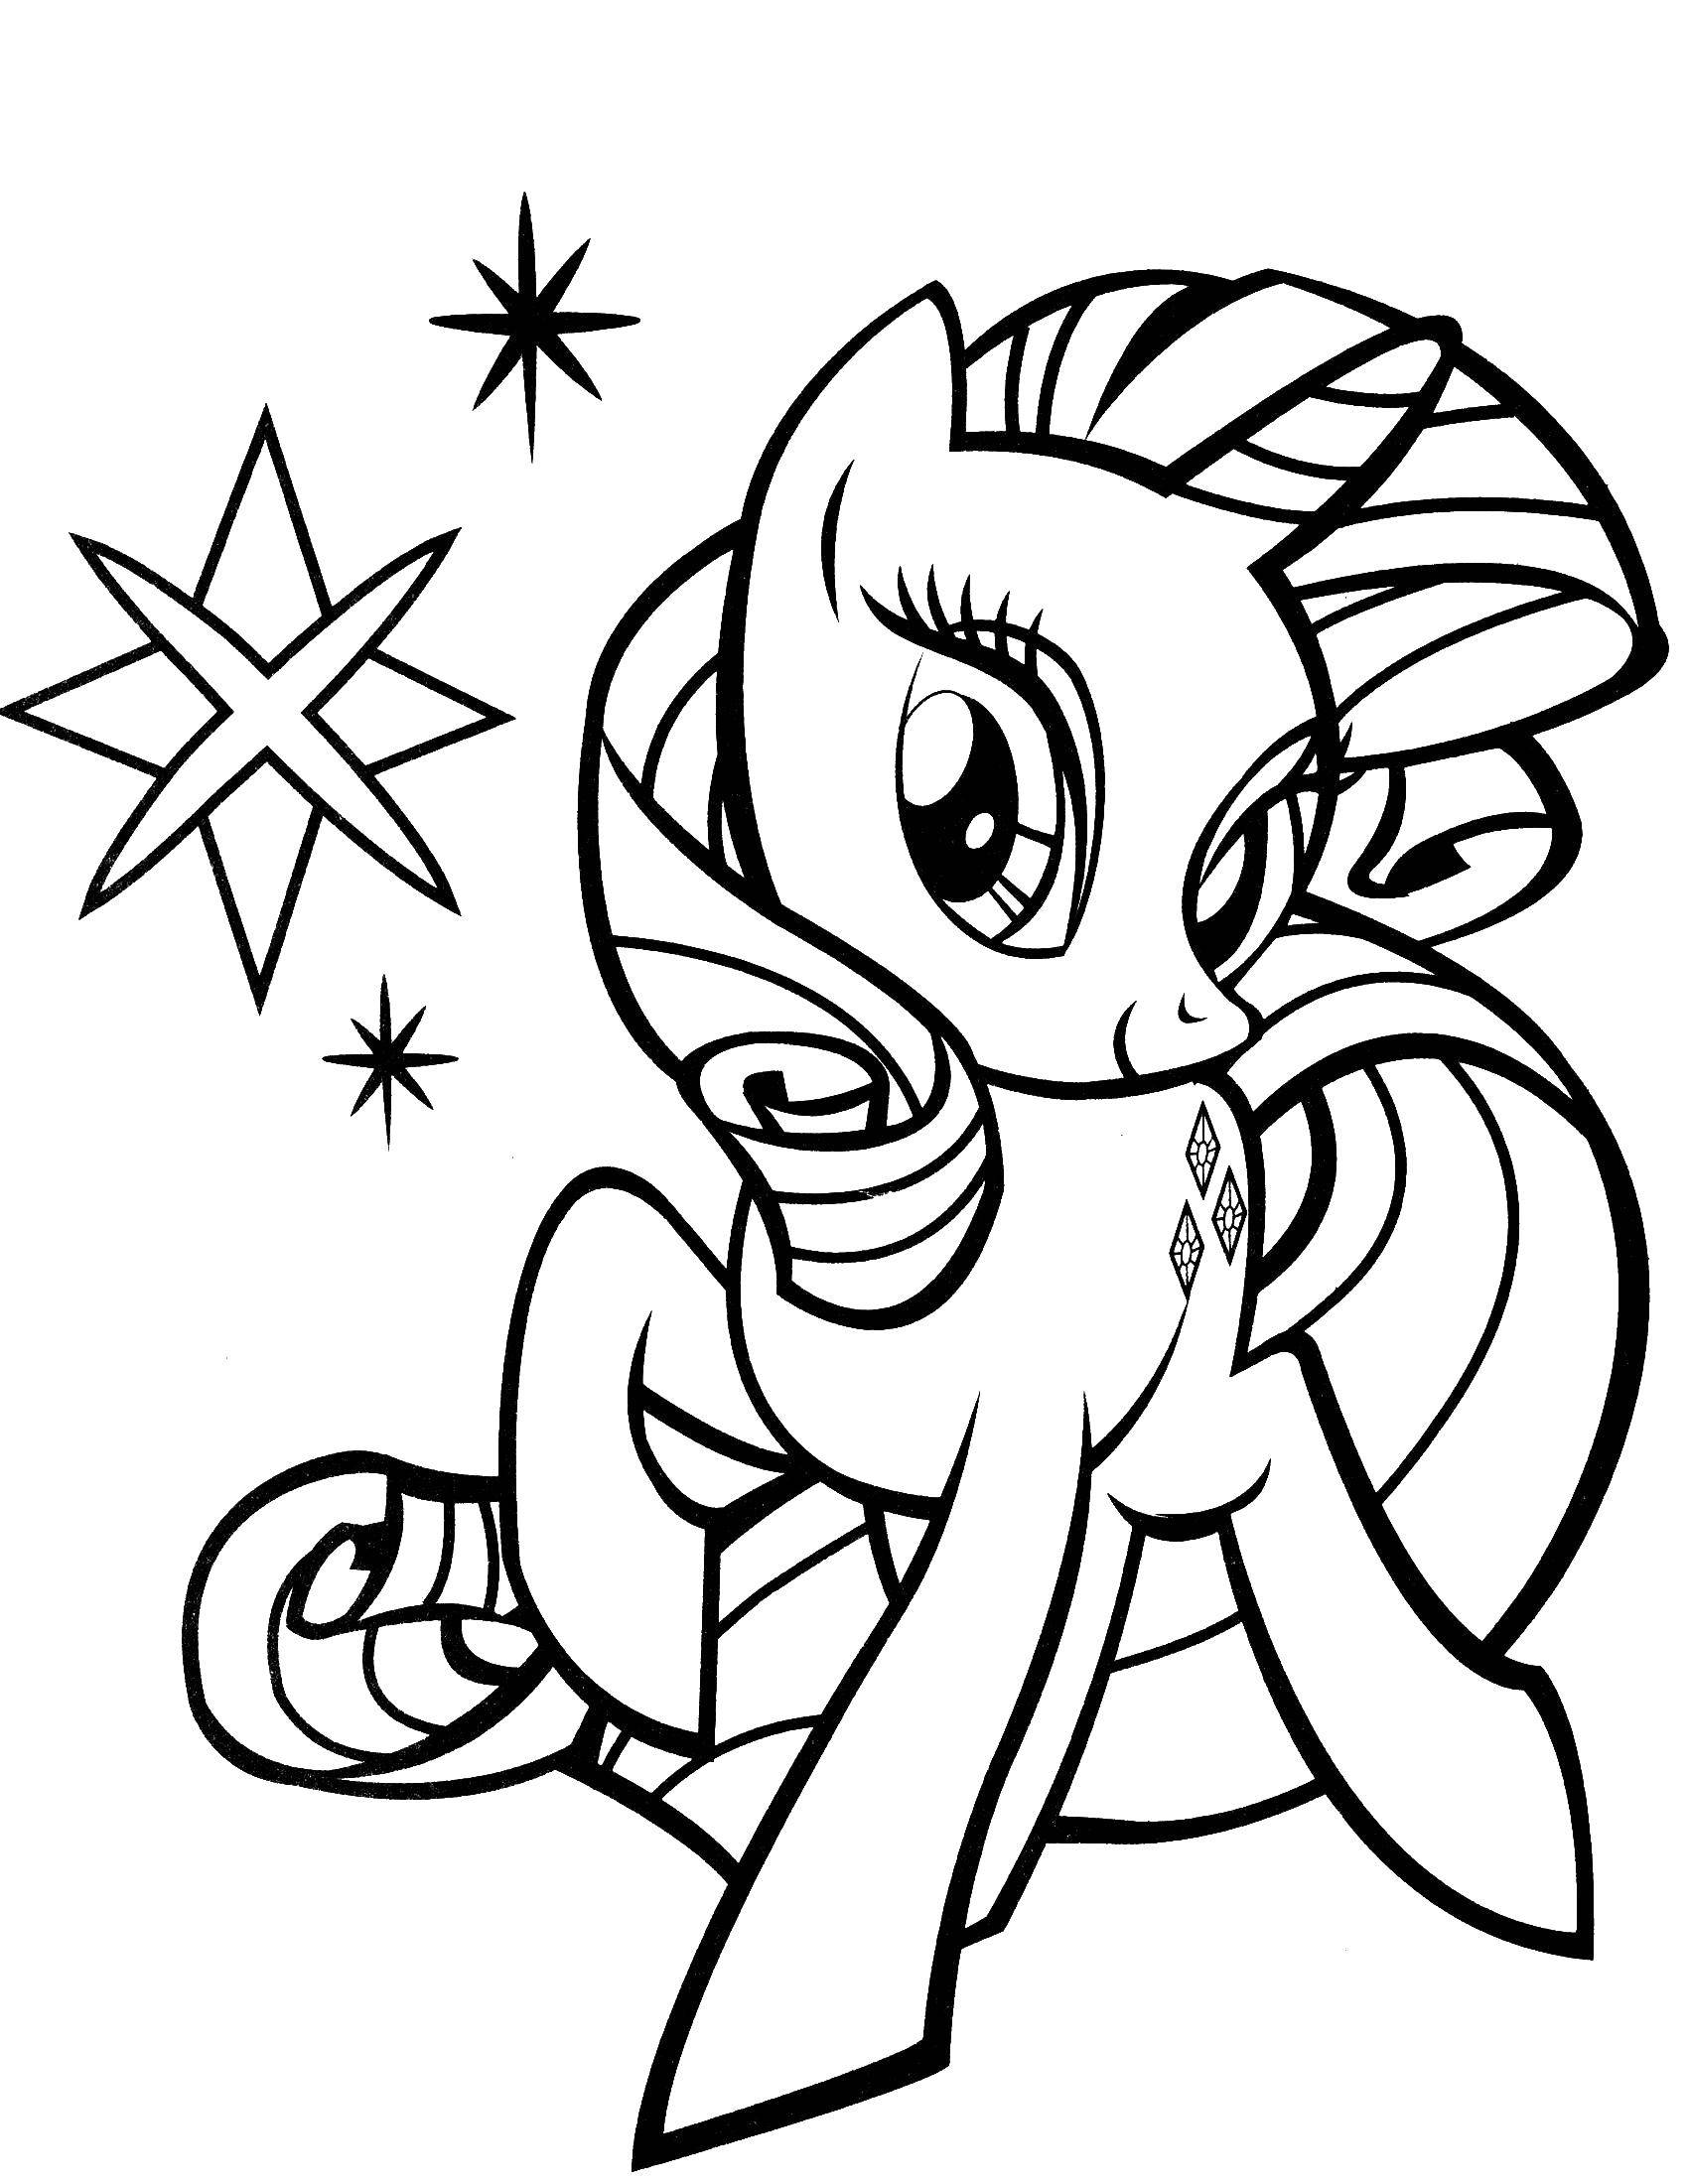 Coloring Beautiful pony. Category Ponies. Tags:  Pony, My little pony.